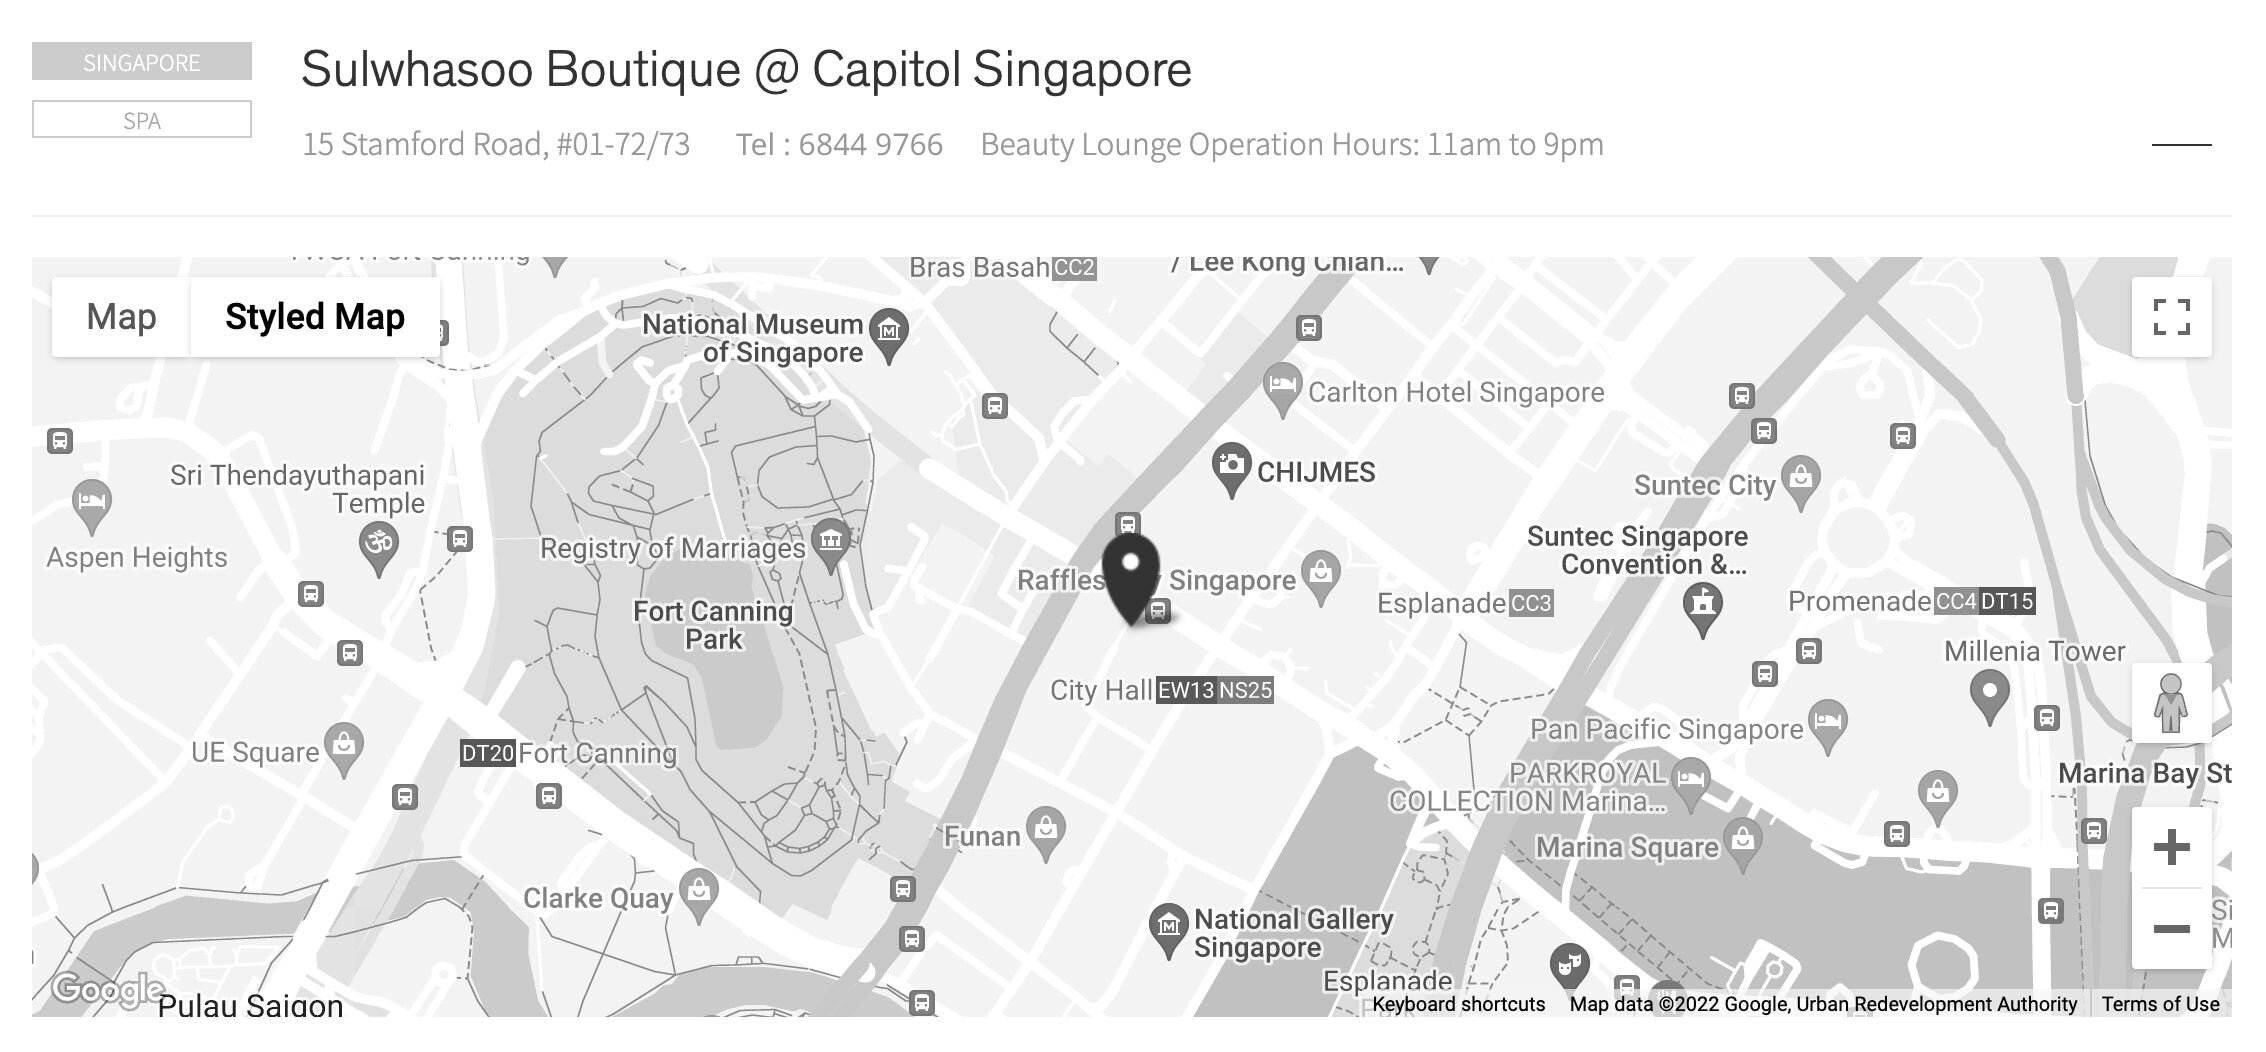 Sulwhasoo Boutique @ Capitol Singapore / 15 Stamford Road, #01-72/73 / Tel:68449766 / Beauty Lounge Operation Hours:11am to 9am